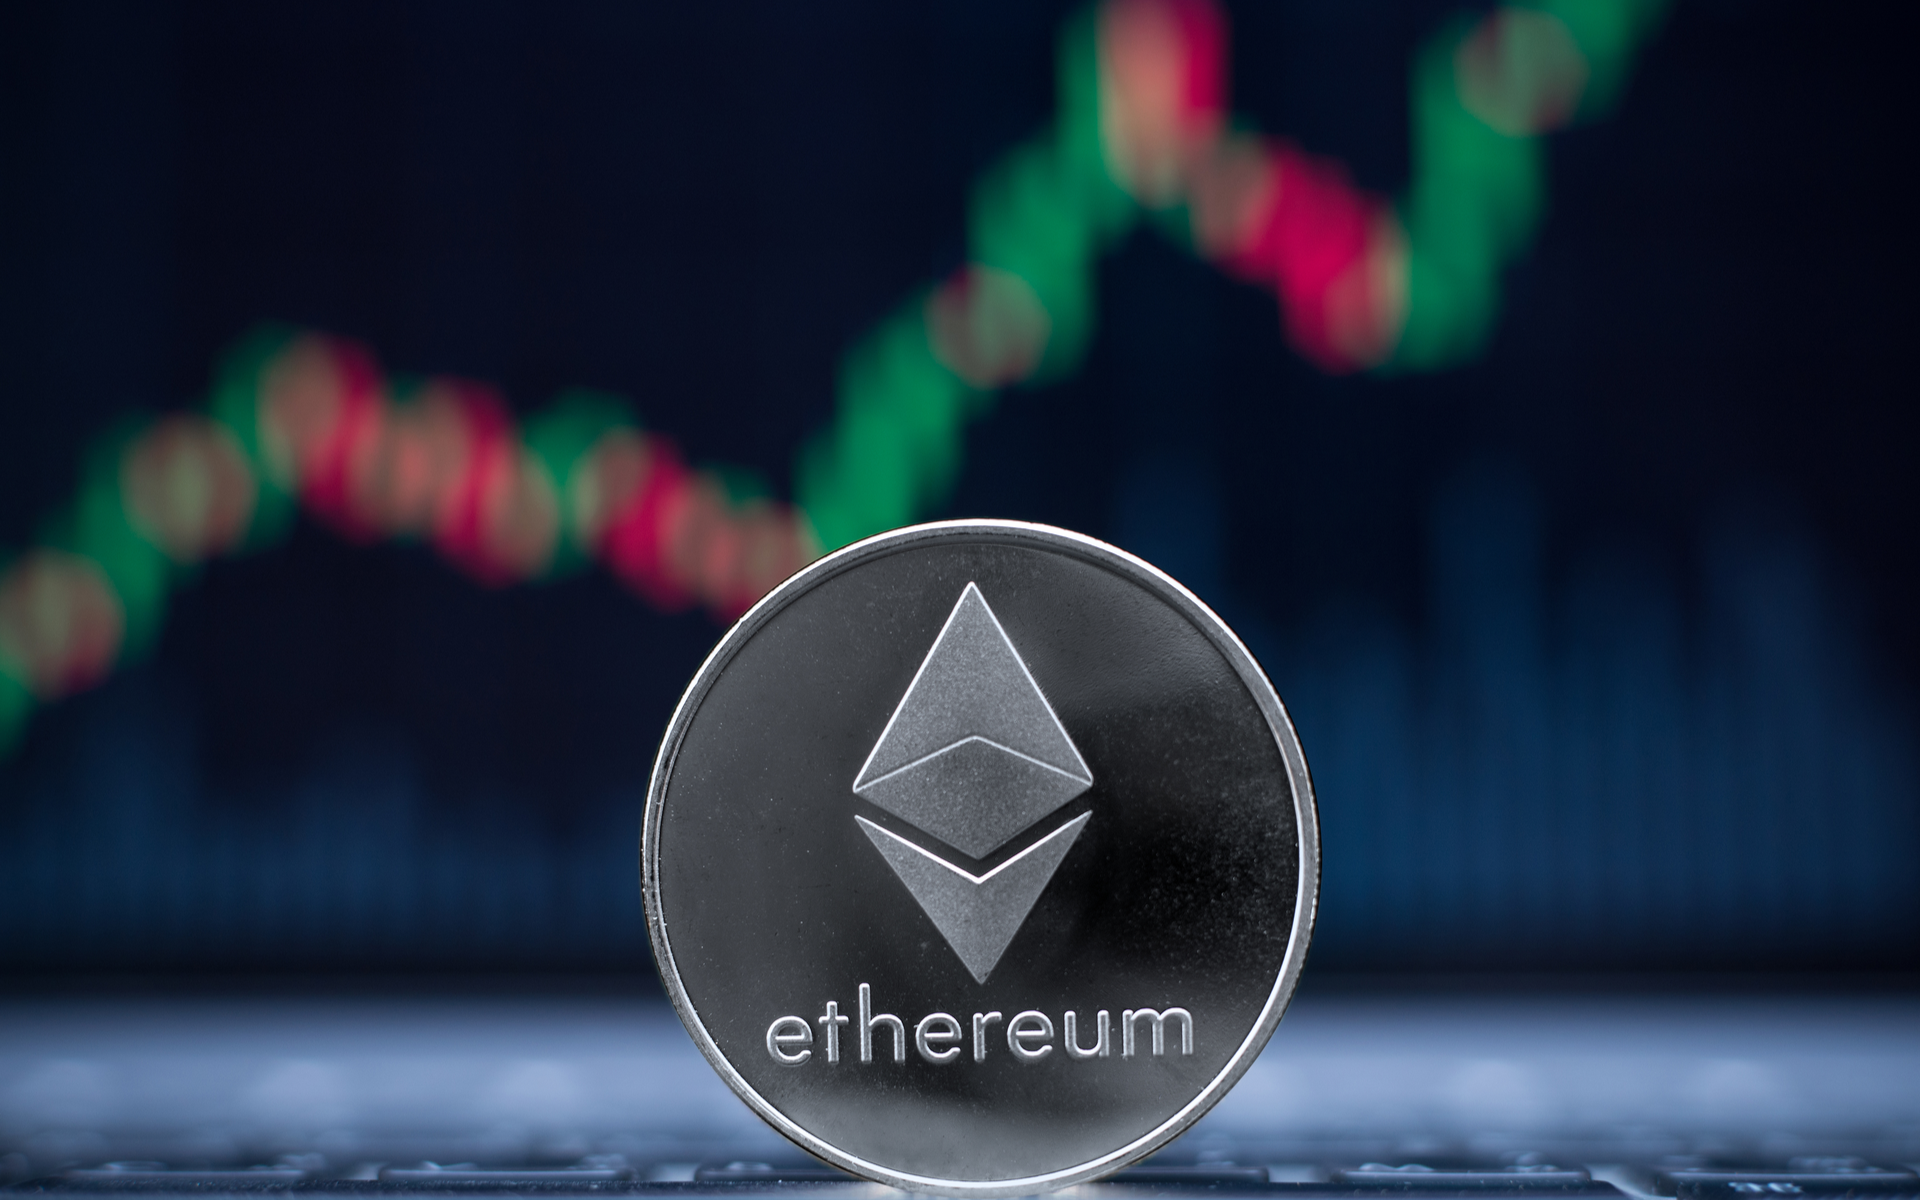 ethereum price can hit usd 300